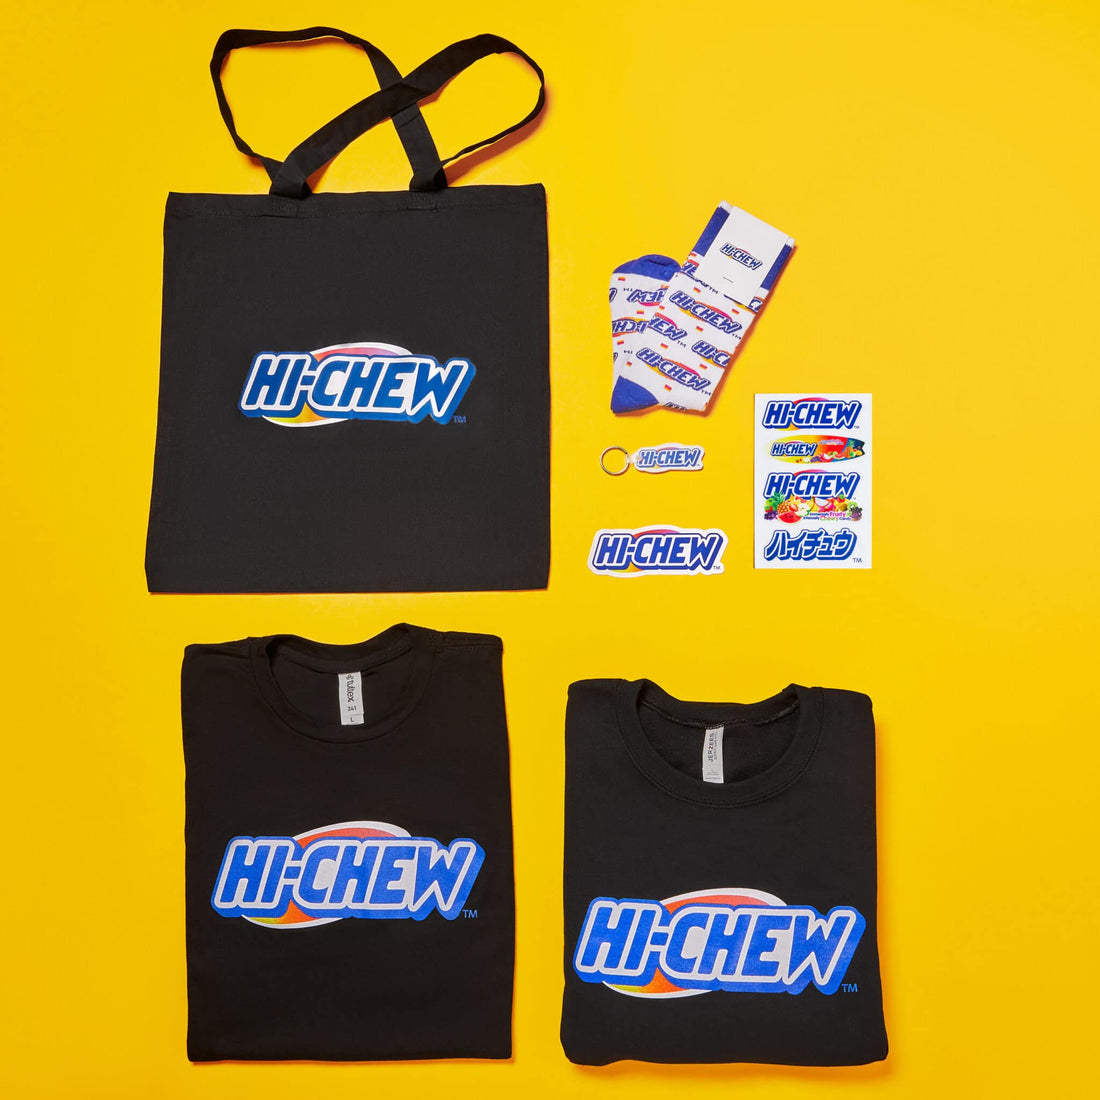 HI-CHEW™ Unveils Limited-Edition Capsule Collection